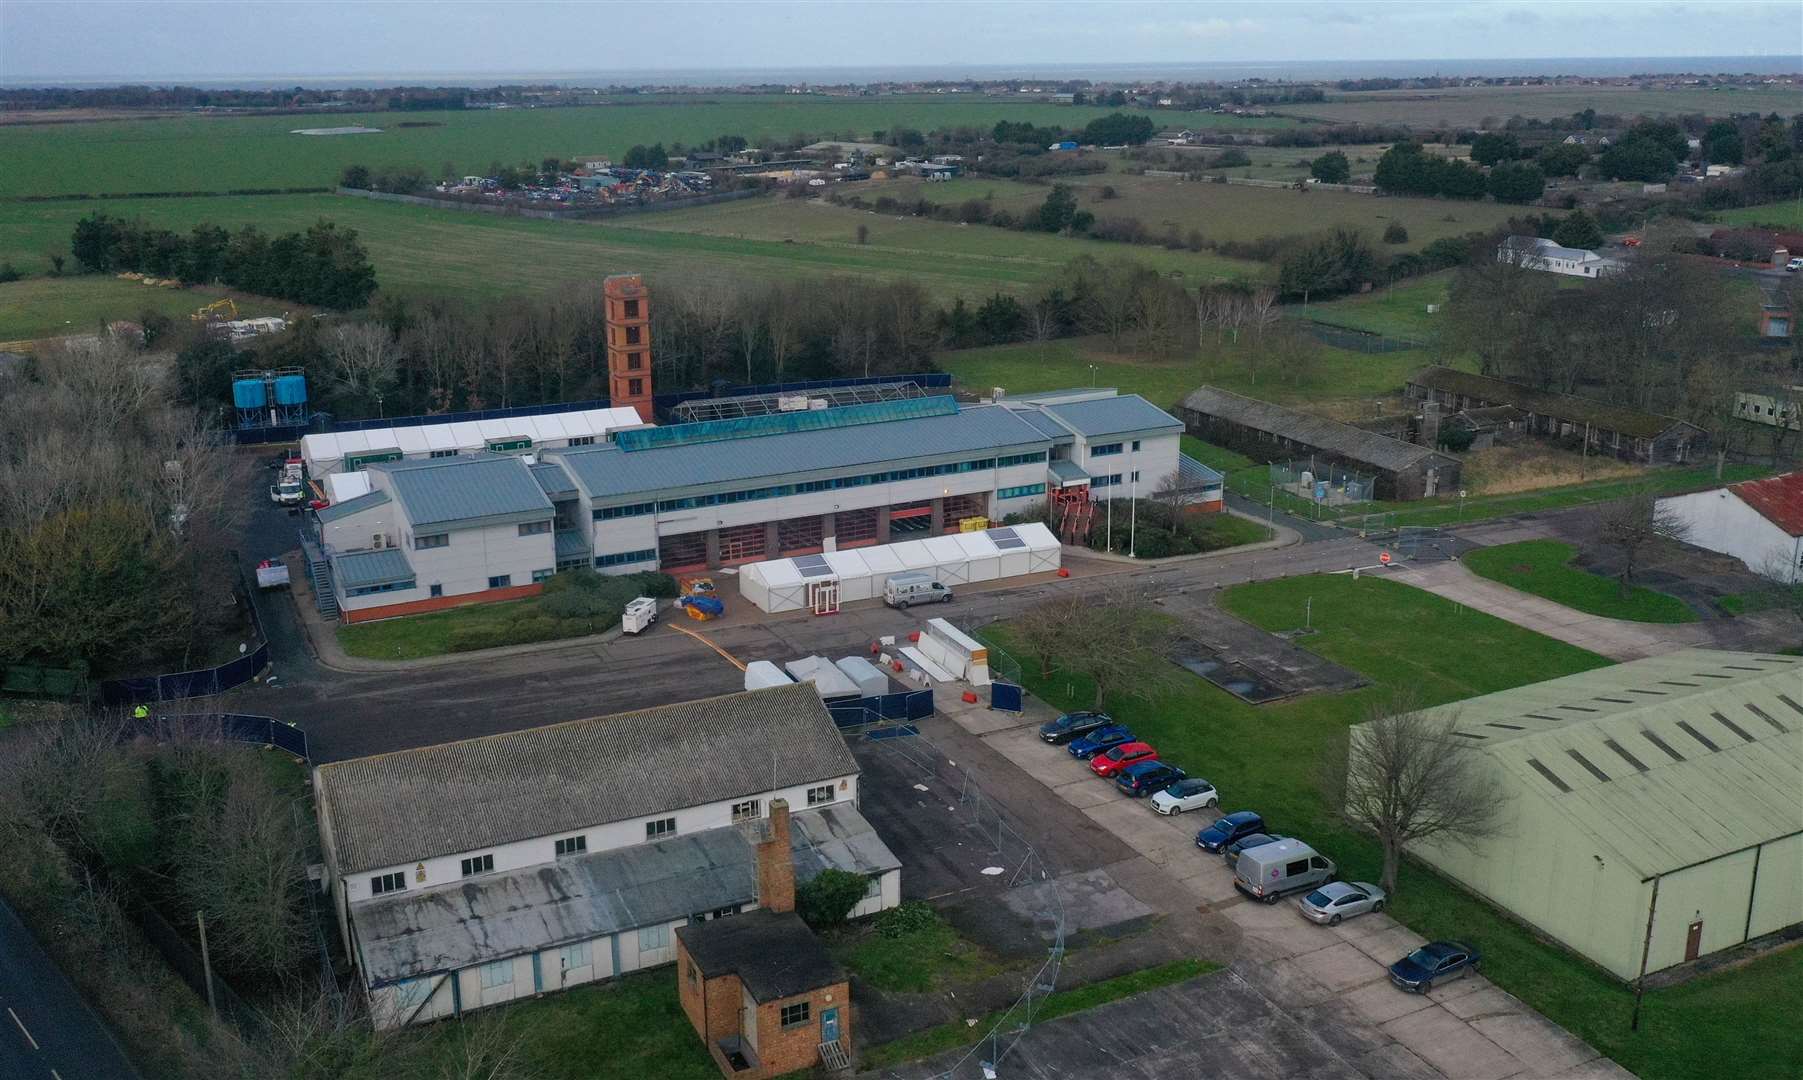 The Manston processing site for asylum seekers